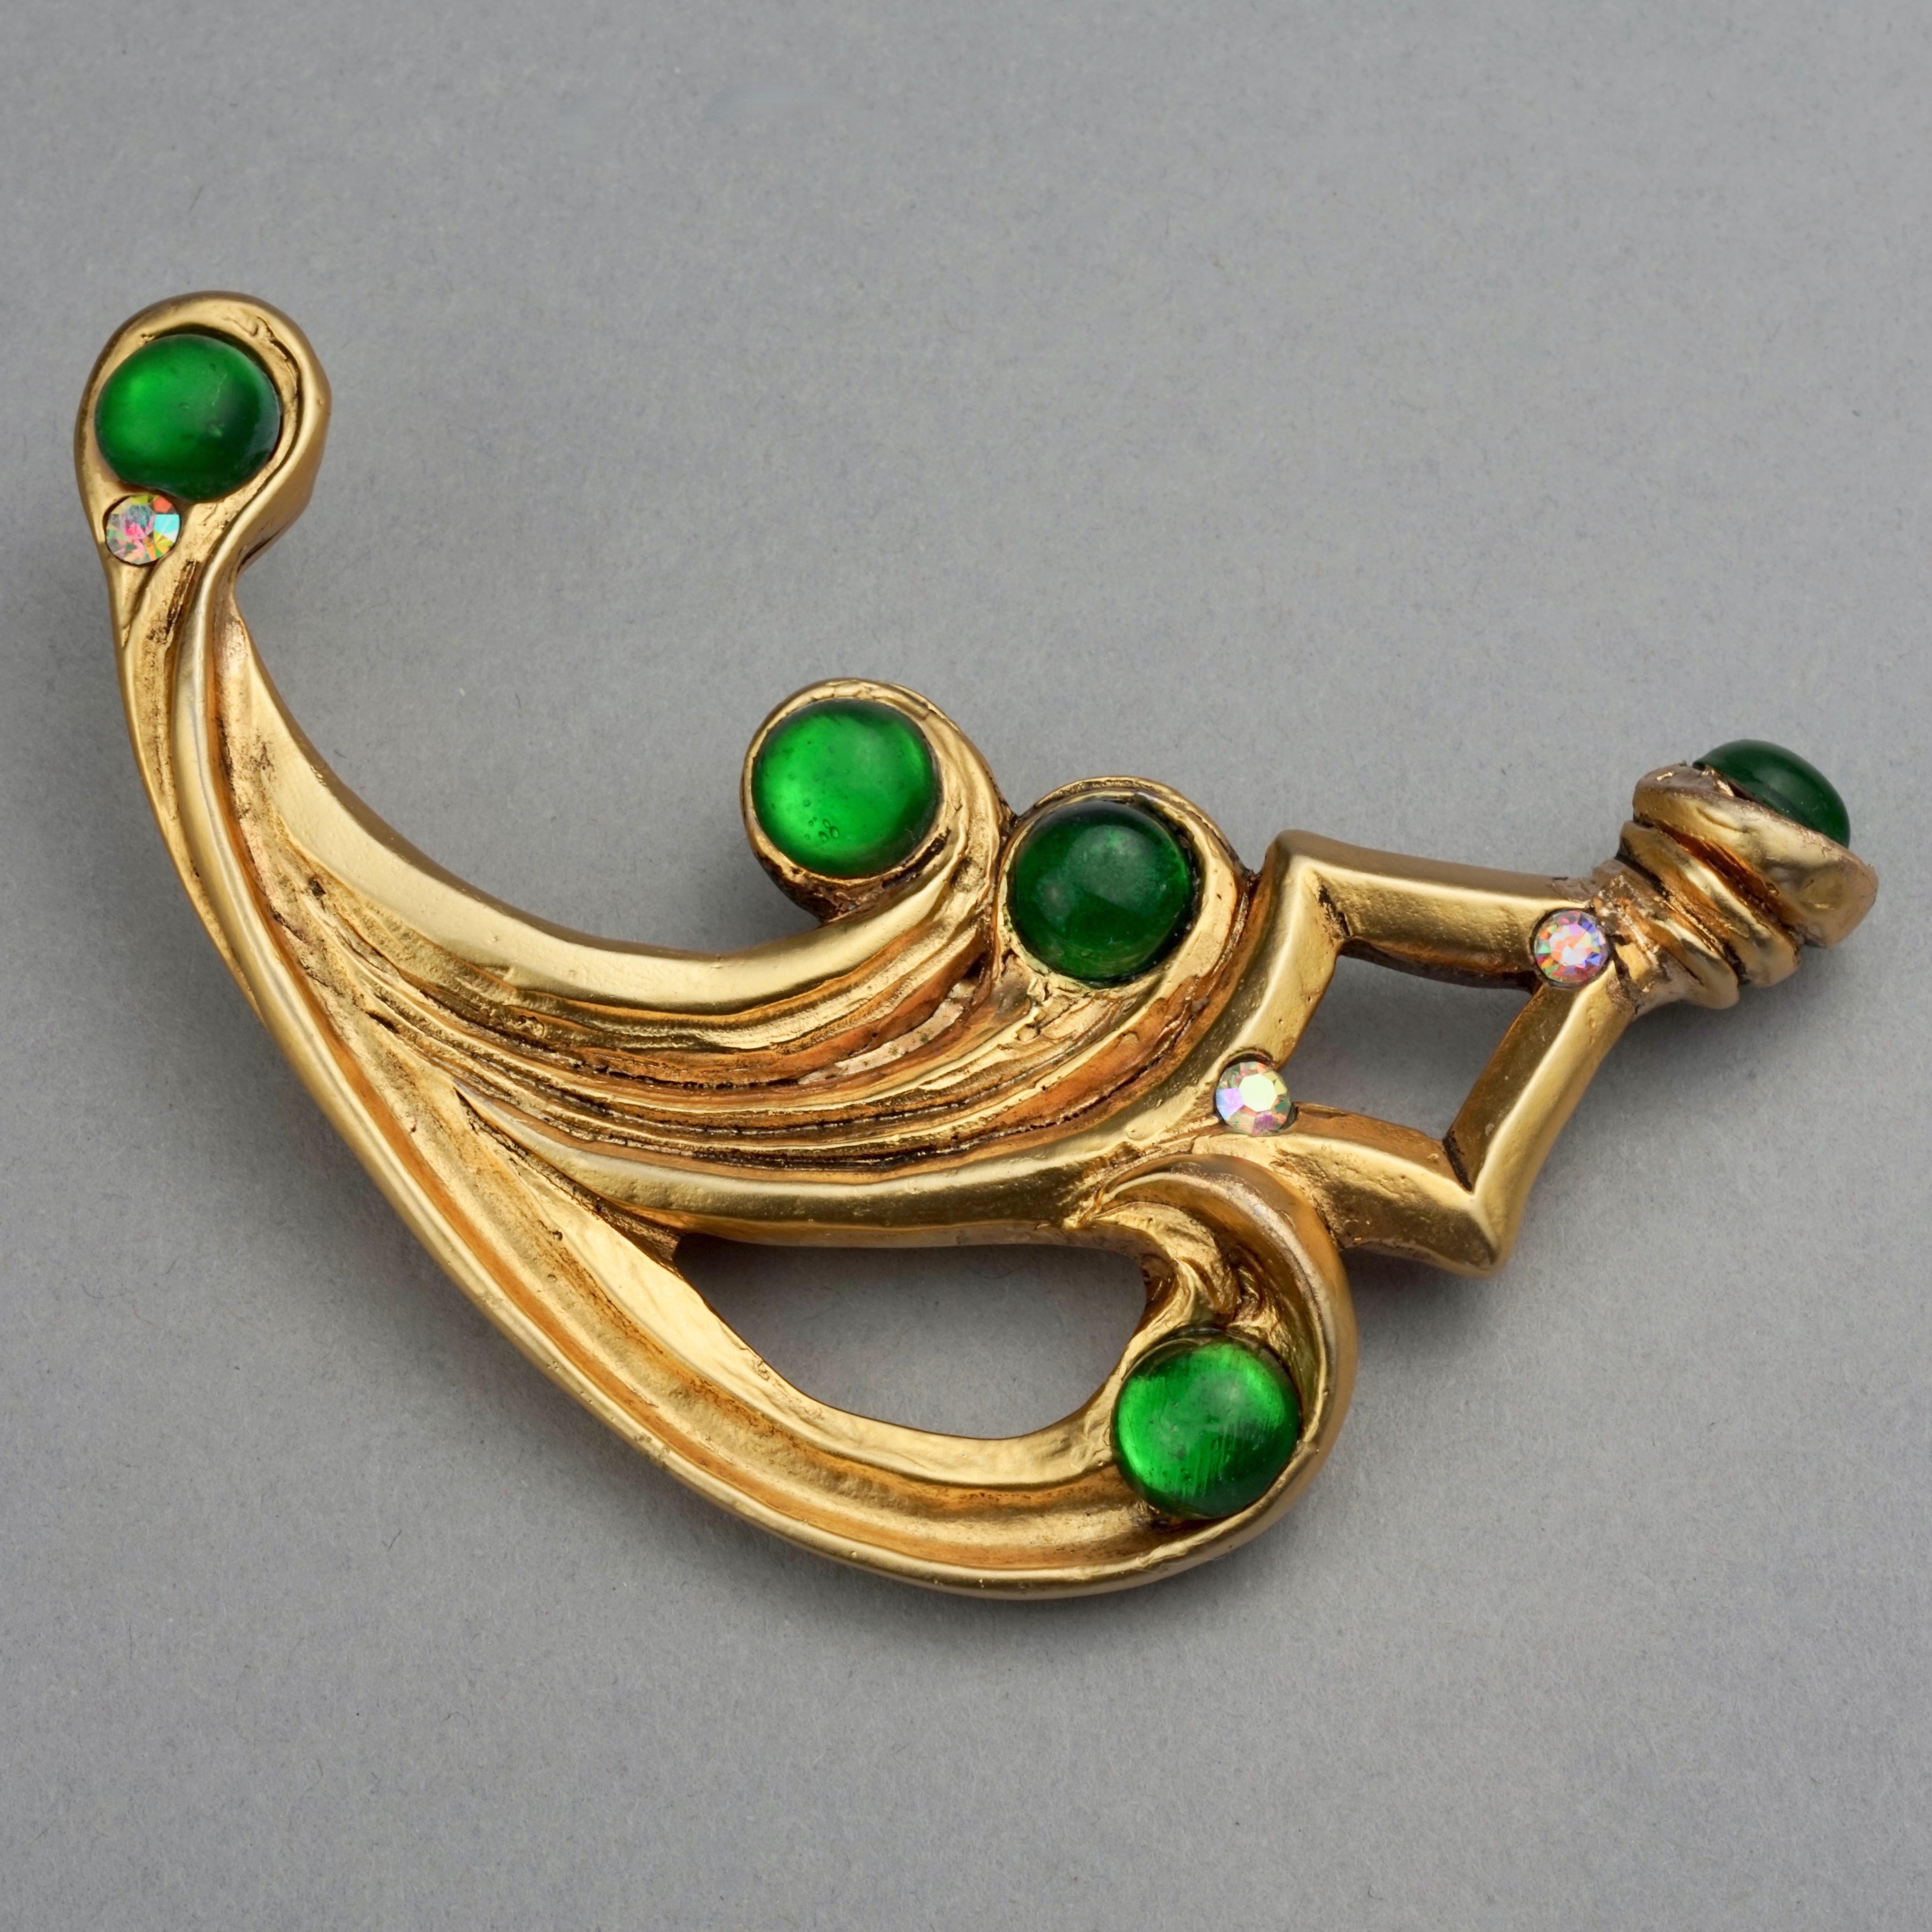 Vintage Massive CLAIRE DEVE PARIS Curved Green Jewelled Brooch For Sale 2